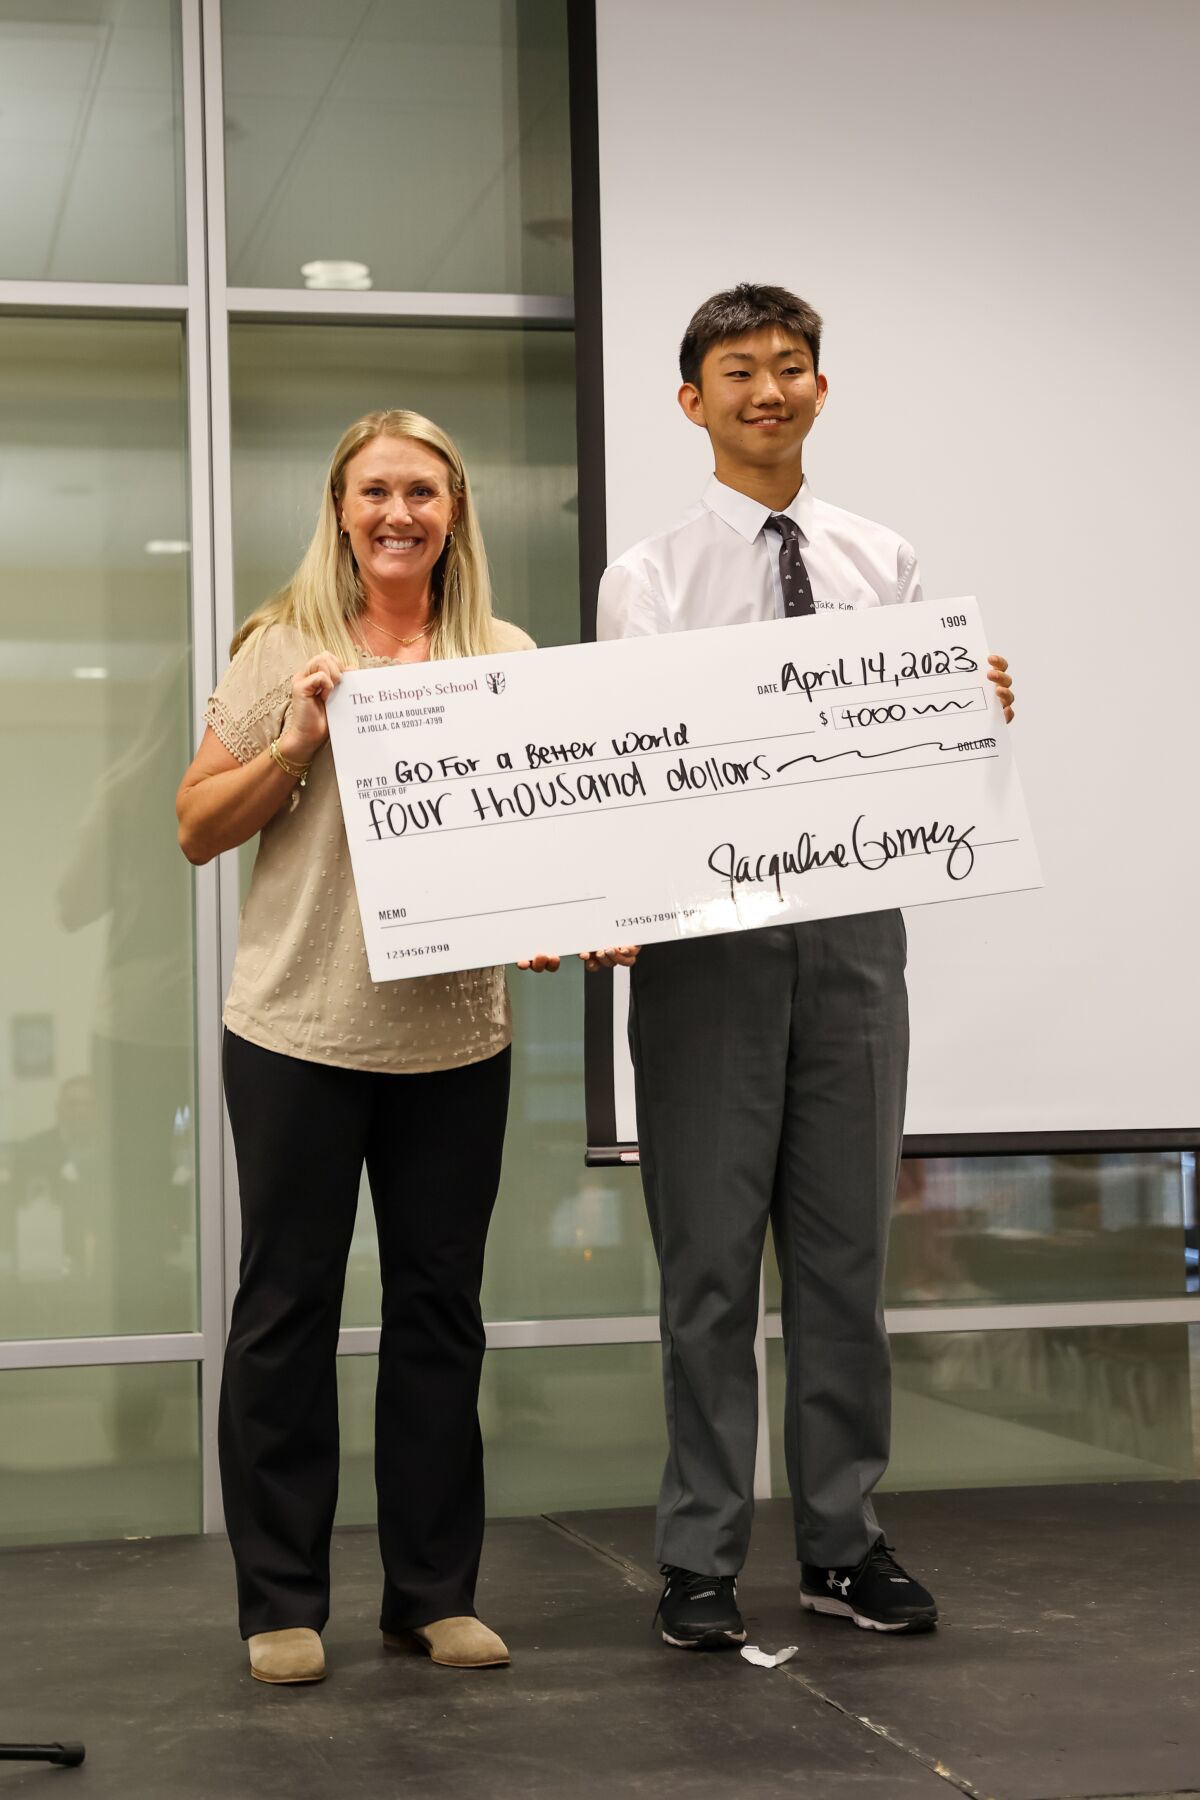 Freshman Jake Kim and The Bishop's School's Social Innovation Competition director, Jacqueline Gomez